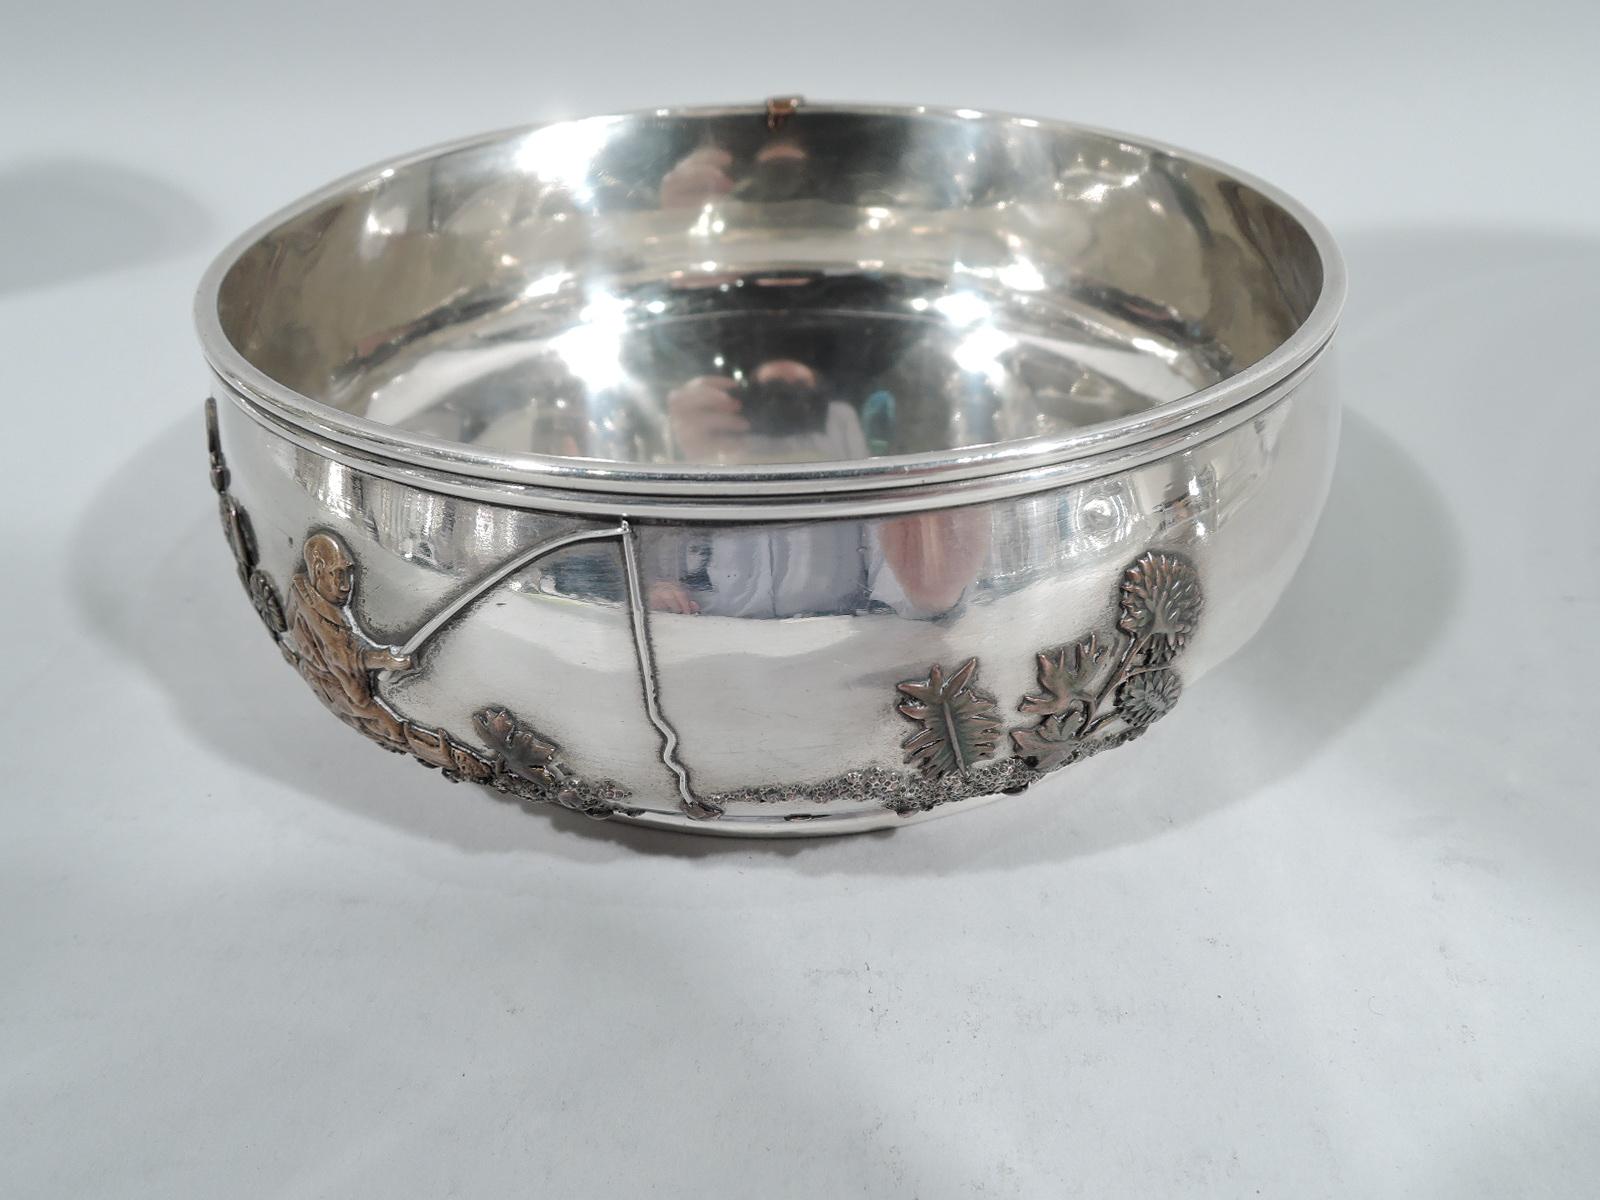 Japonesque mixed metal on sterling silver bowl. Made by Gorham in Providence in 1881. Curved sides, molded rim, and foot rim. On exterior are applied vegetation rooted in granulated soil, a stray dragonfly, and solitary fisherman who has hooked a